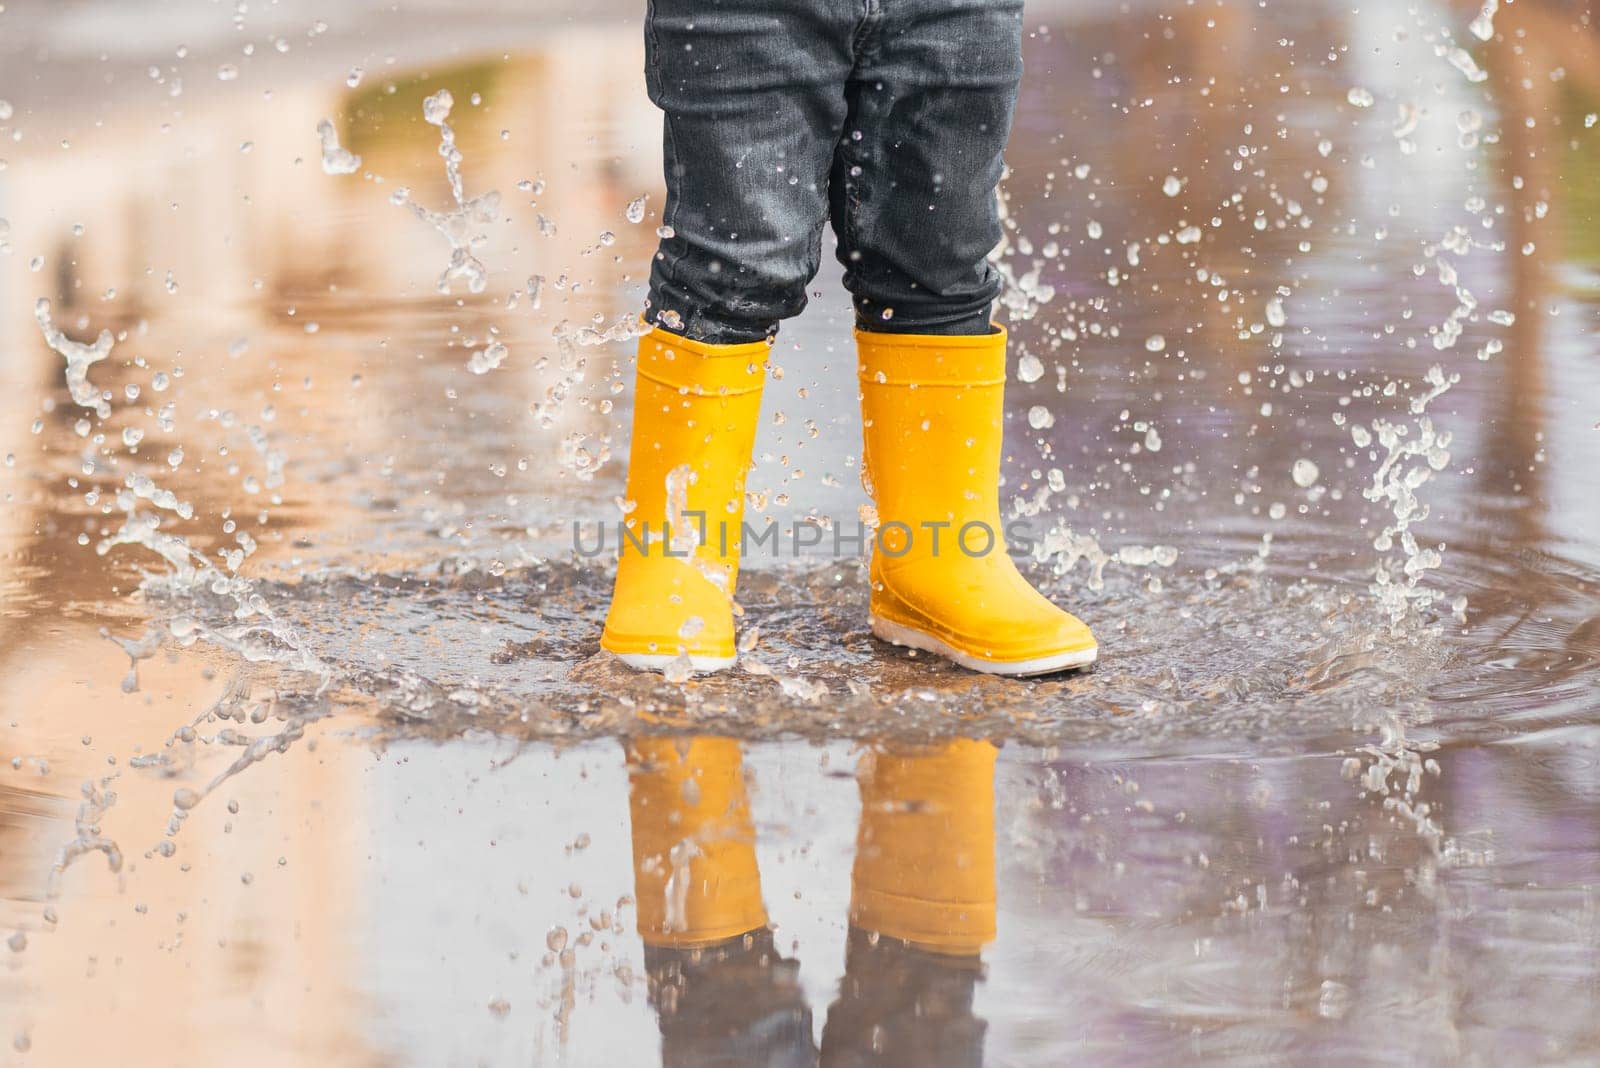 Child's feet in yellow rubber boots jumping over a puddle in the rain by jcdiazhidalgo